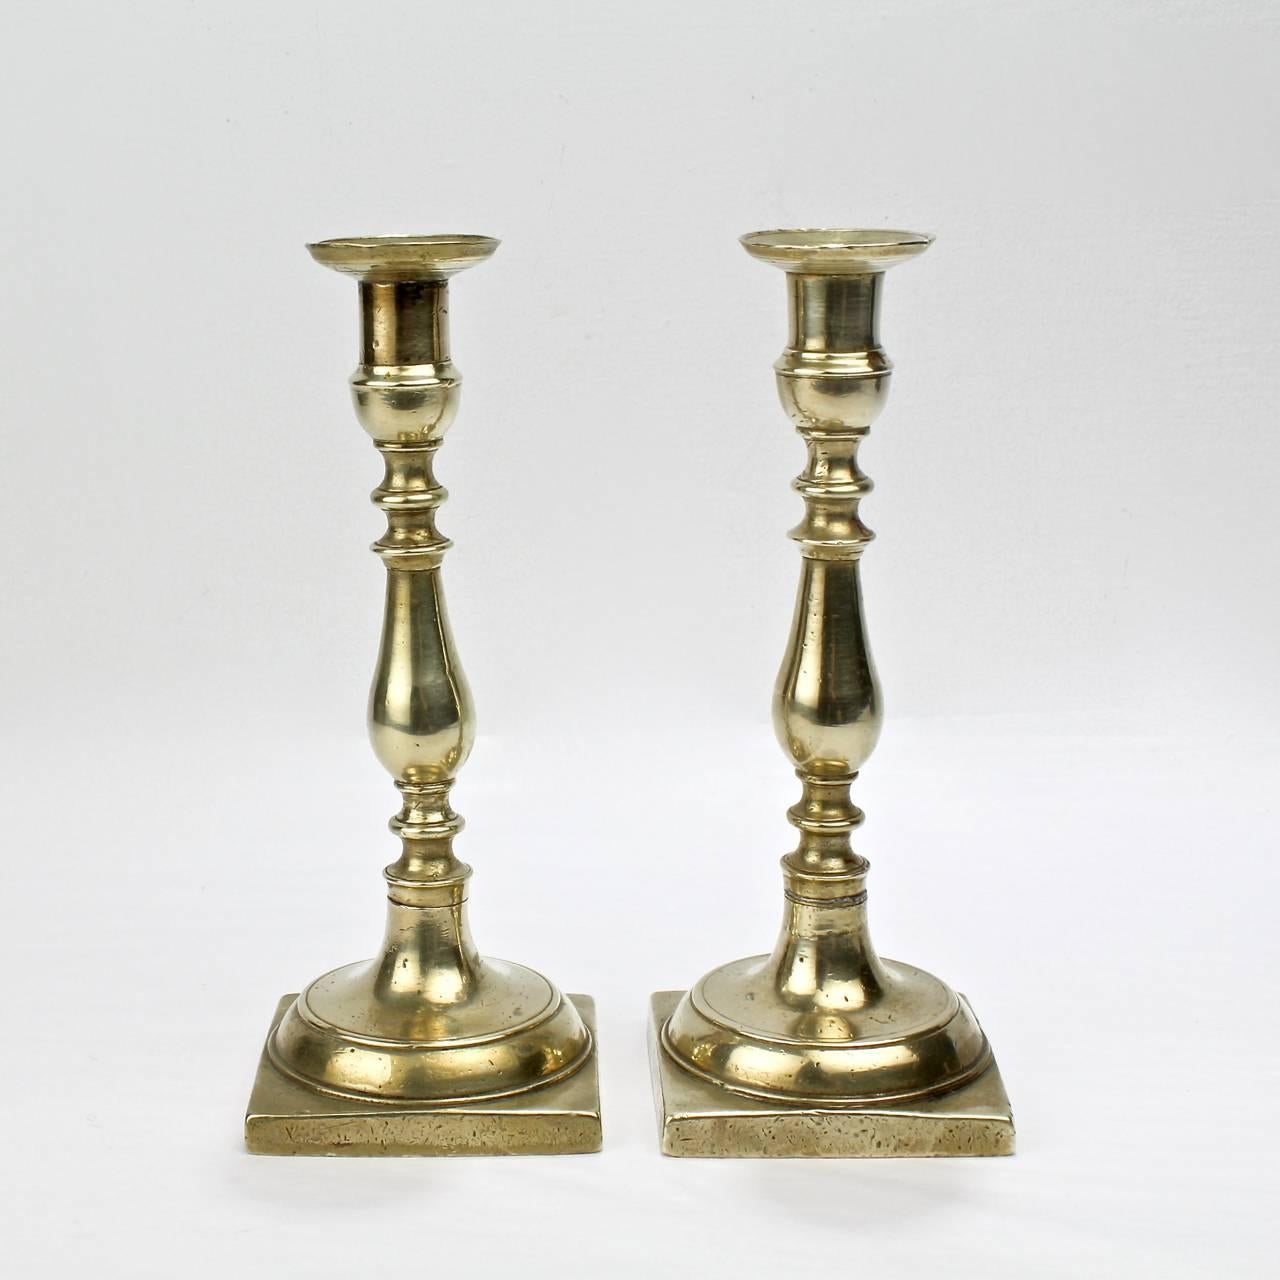 European Pair of Early 19th Century Continental Brass Candlesticks For Sale